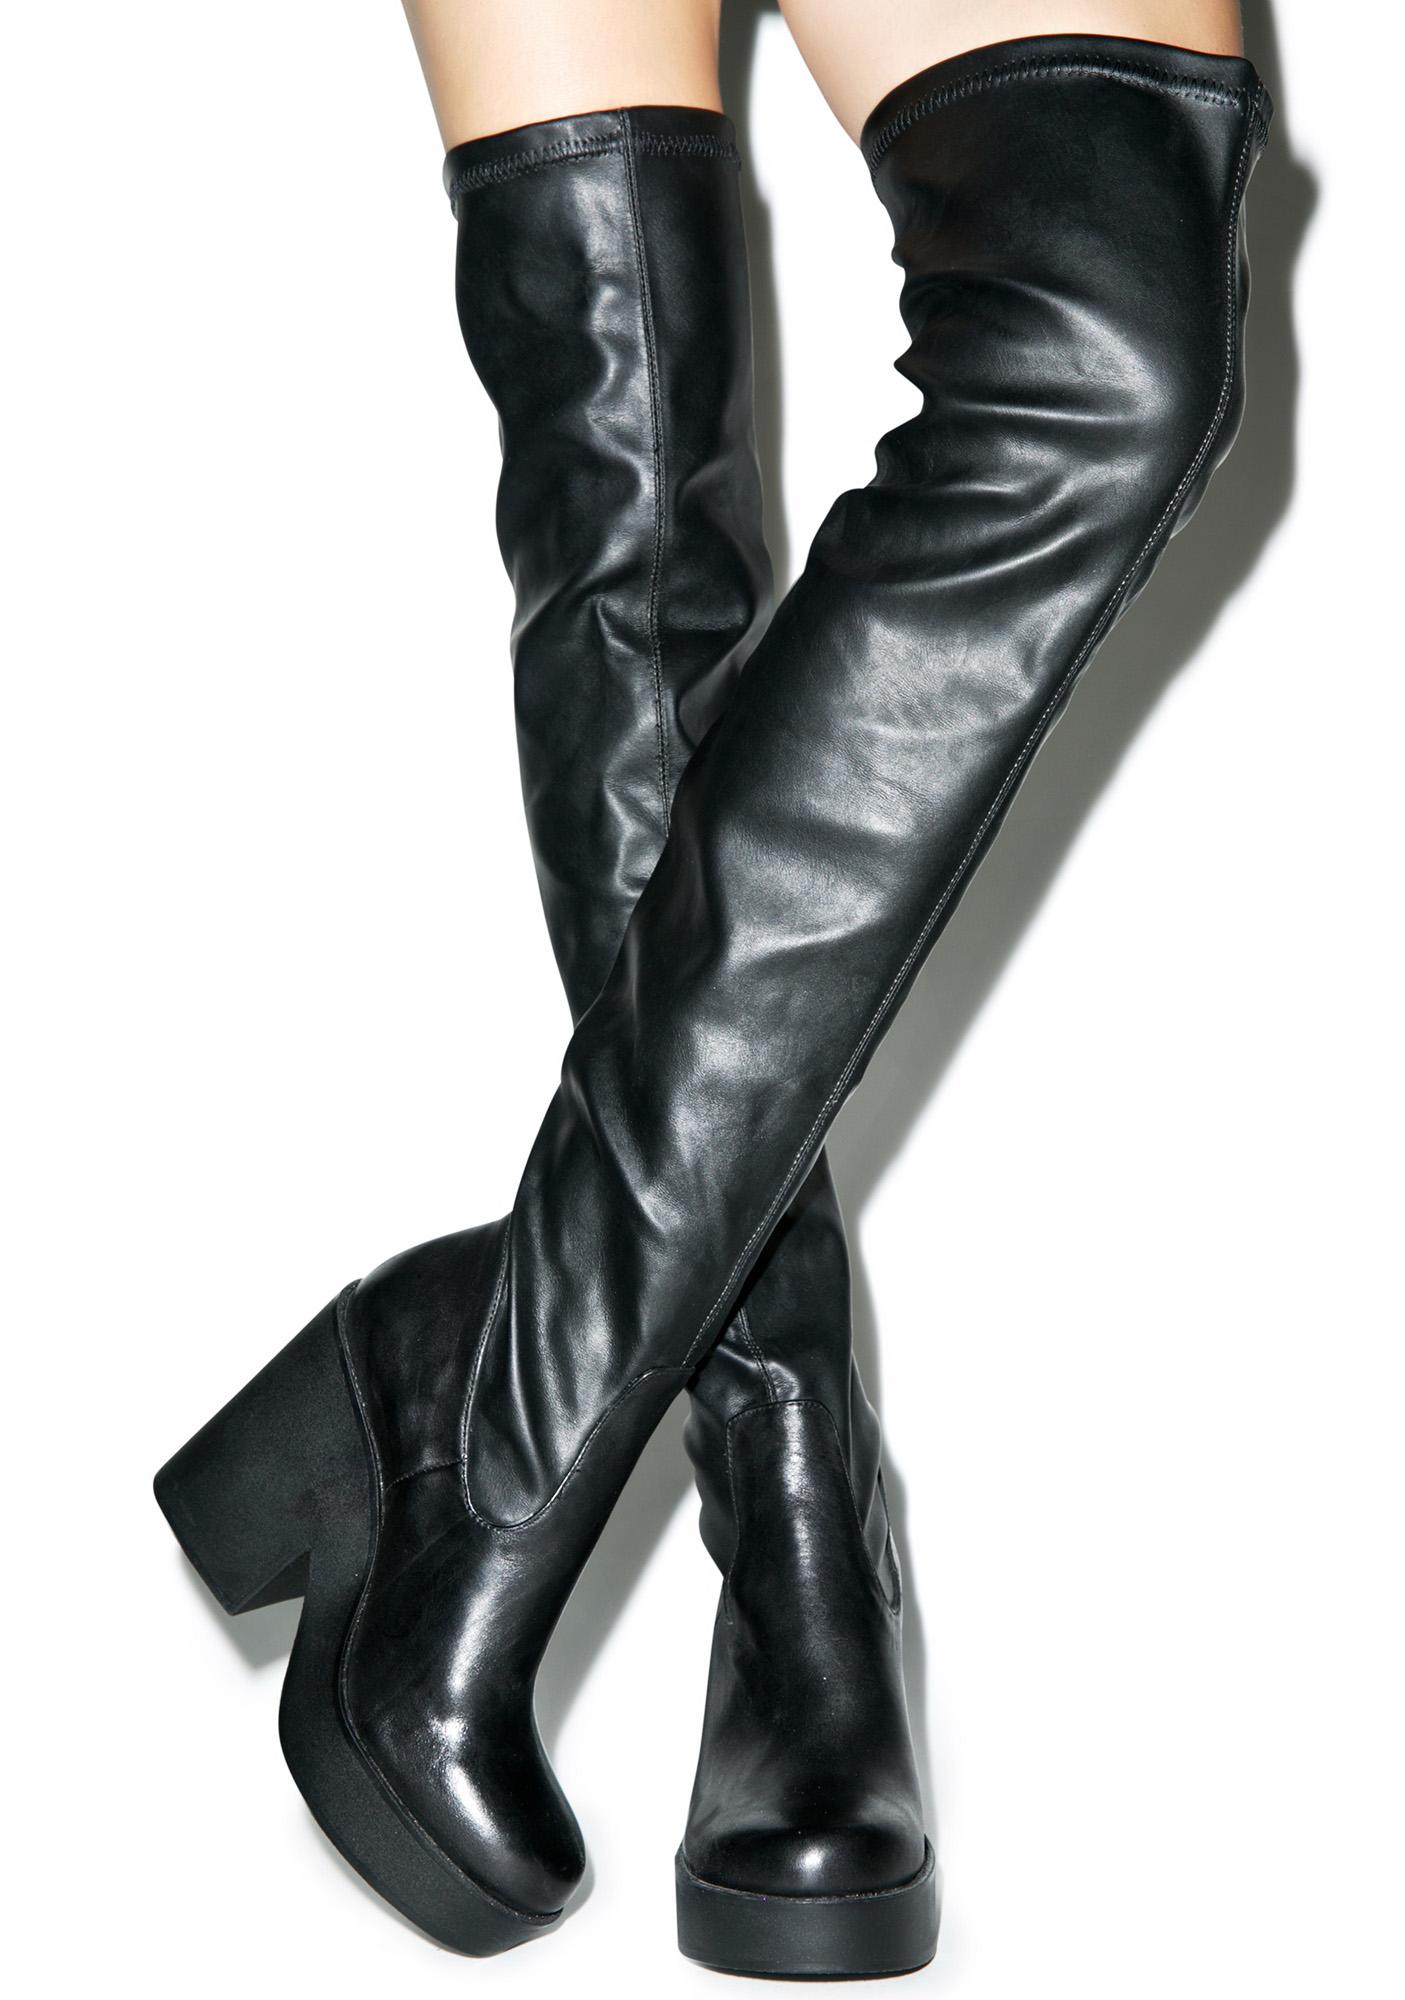 windsor smith knee high boots